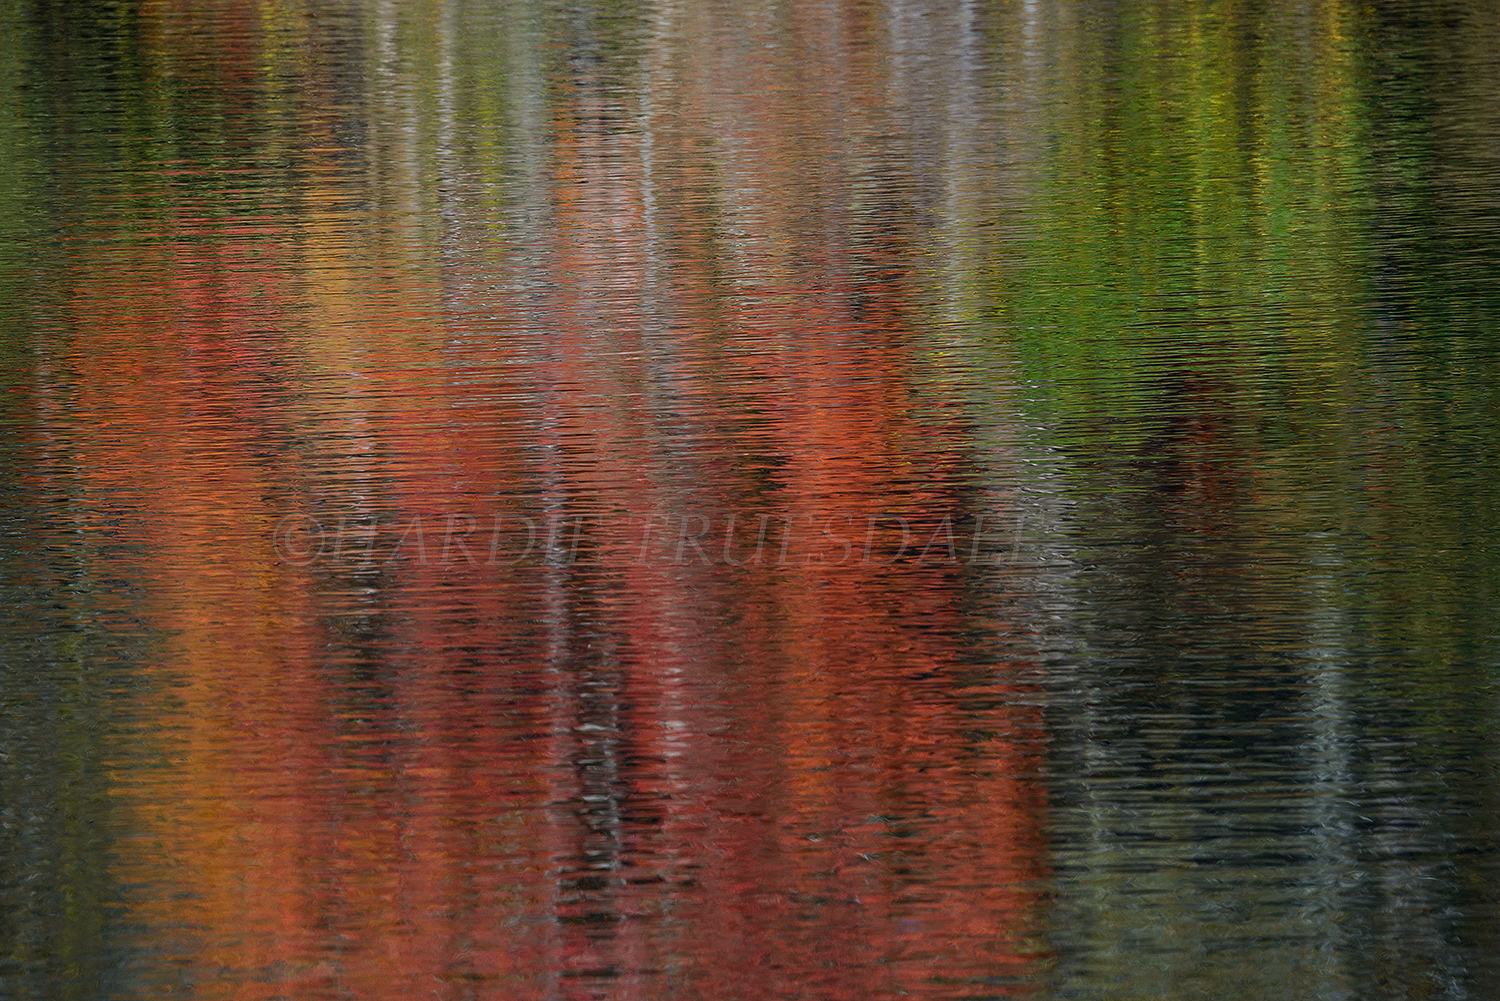 CC#151 "Touch of Red" Meadow Bog Pond, Cape Cod